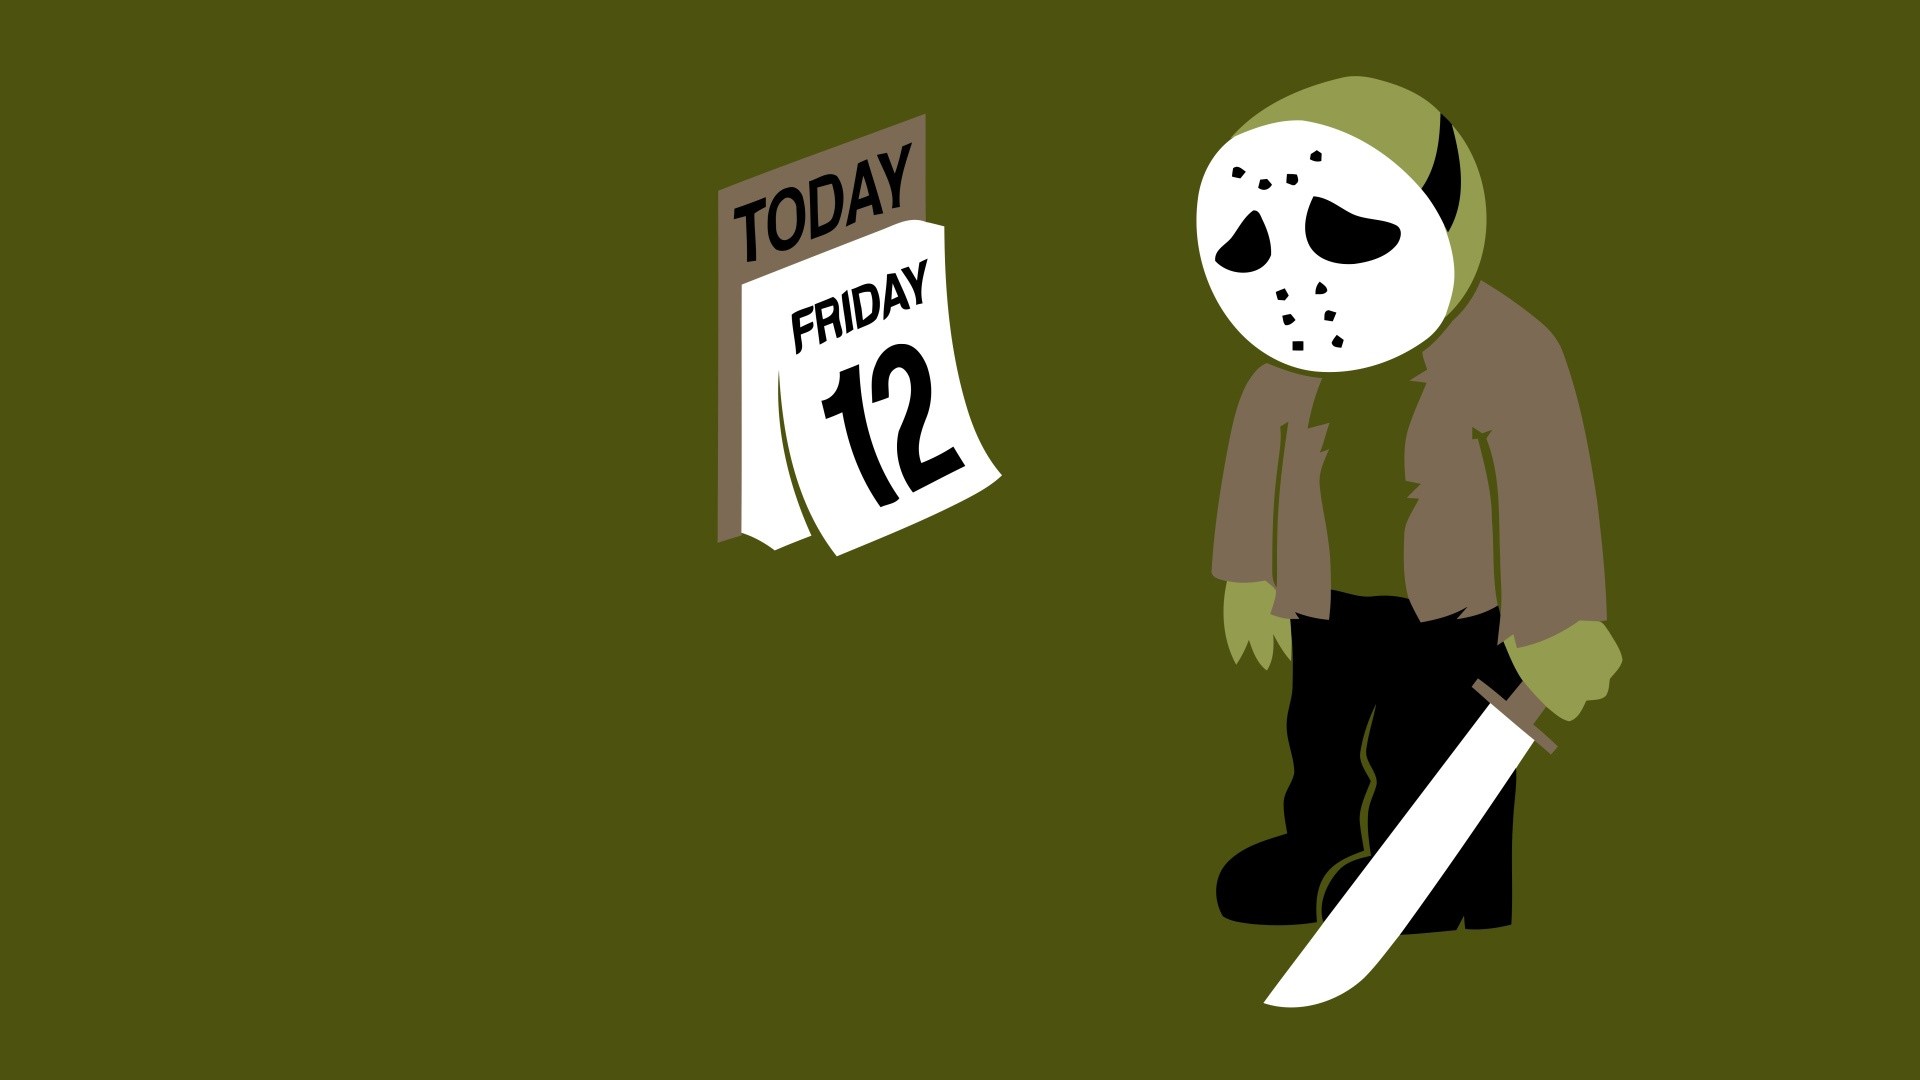 1920x1080 Killer-friday-funny-wallpapers-free-hd-for-desktop